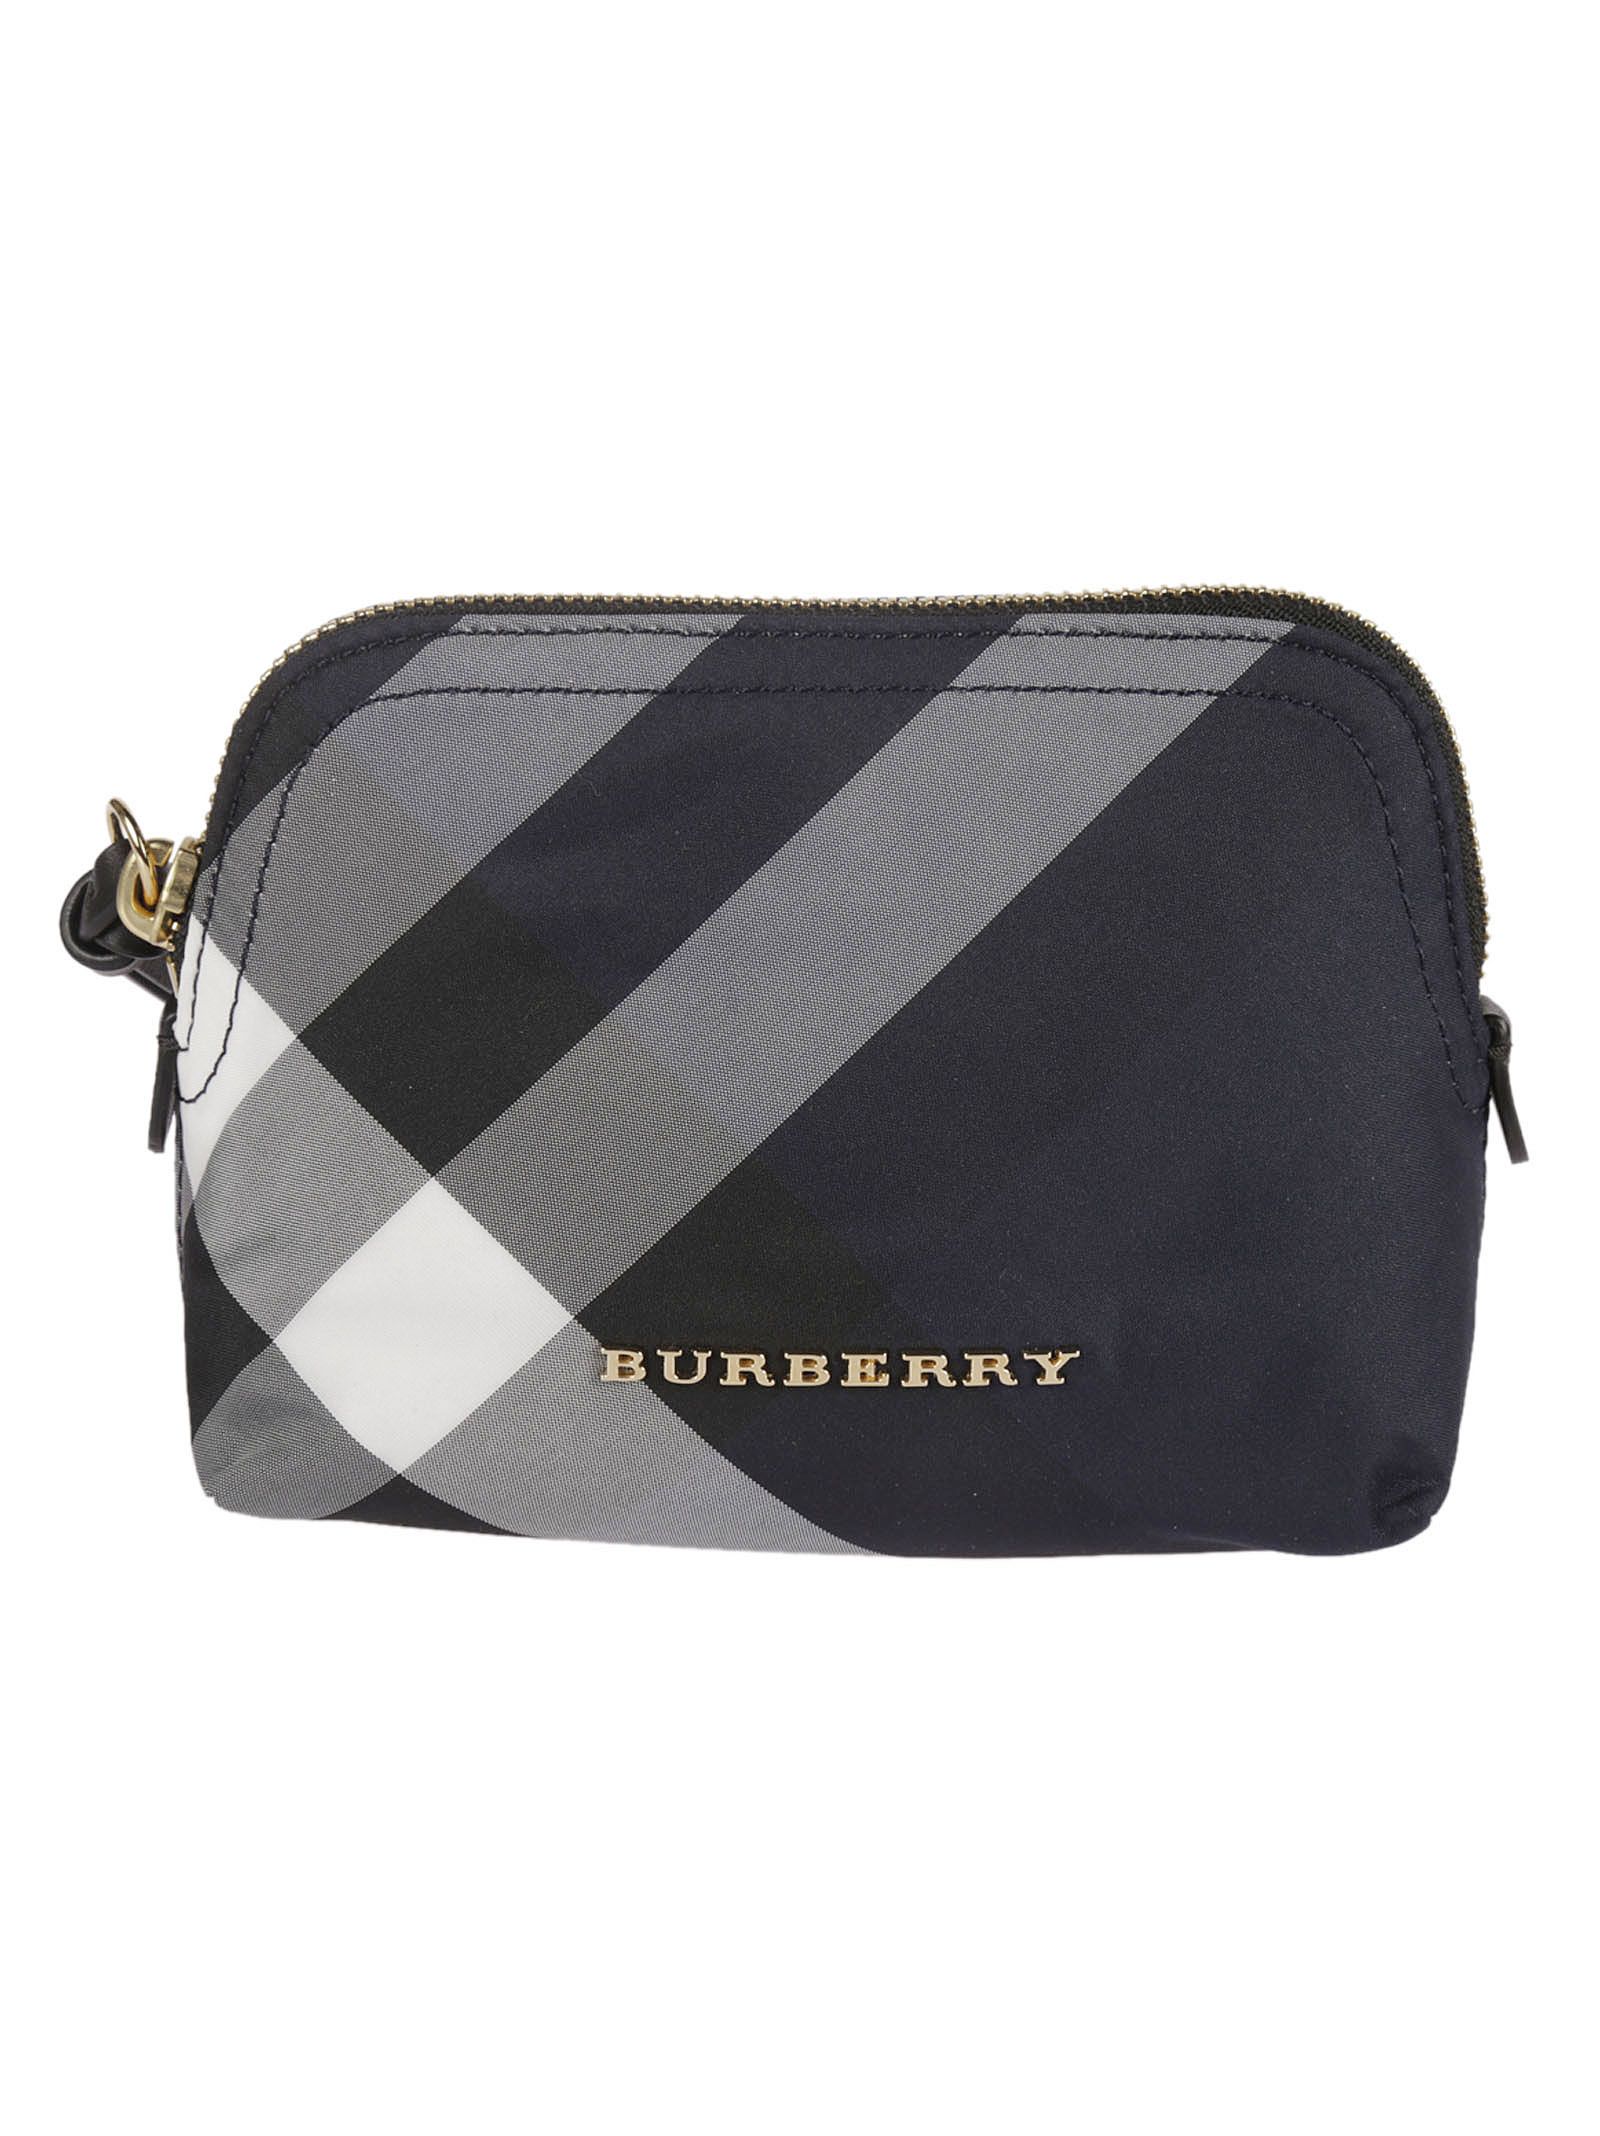 Burberry - Burberry Checked Clutch - Blue, Women's Clutches | Italist